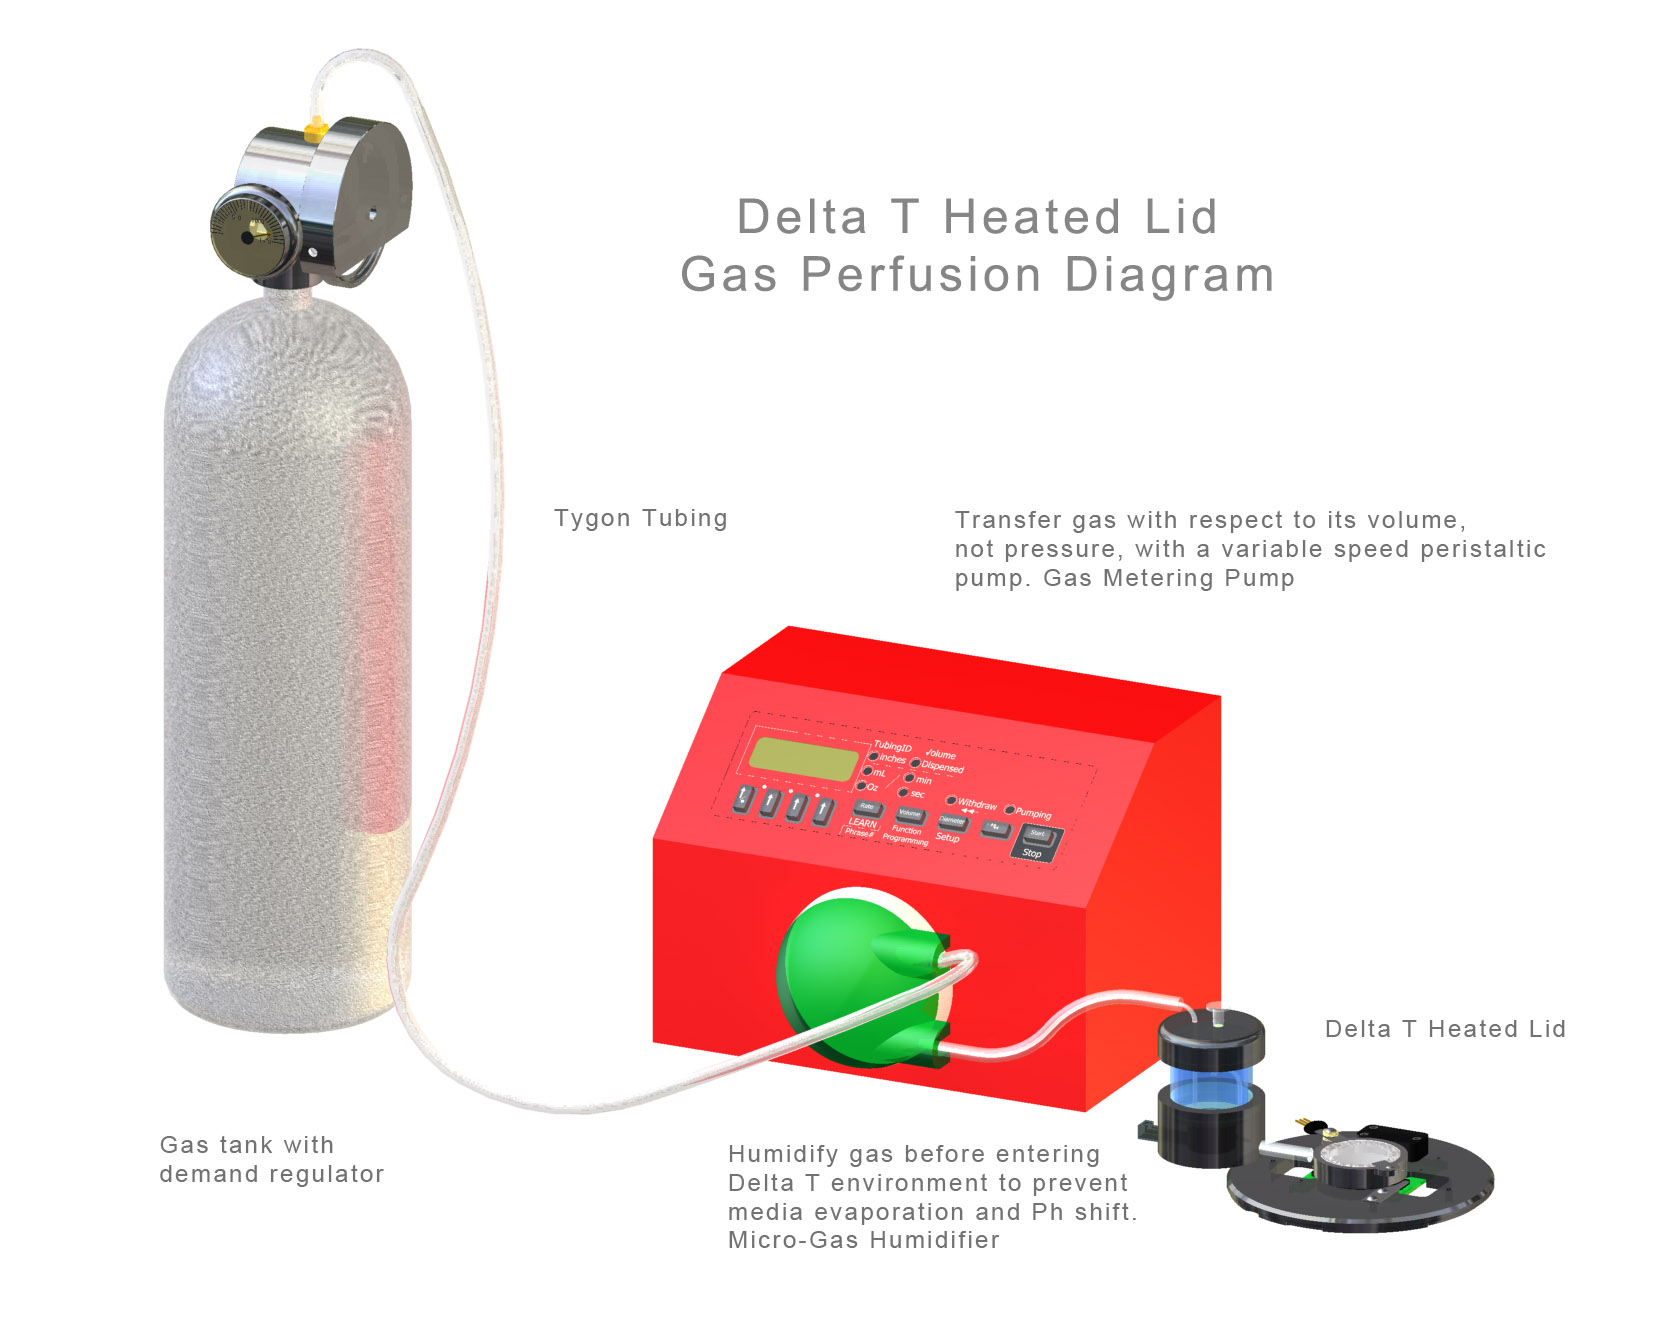 Delta T Gas Perfusion